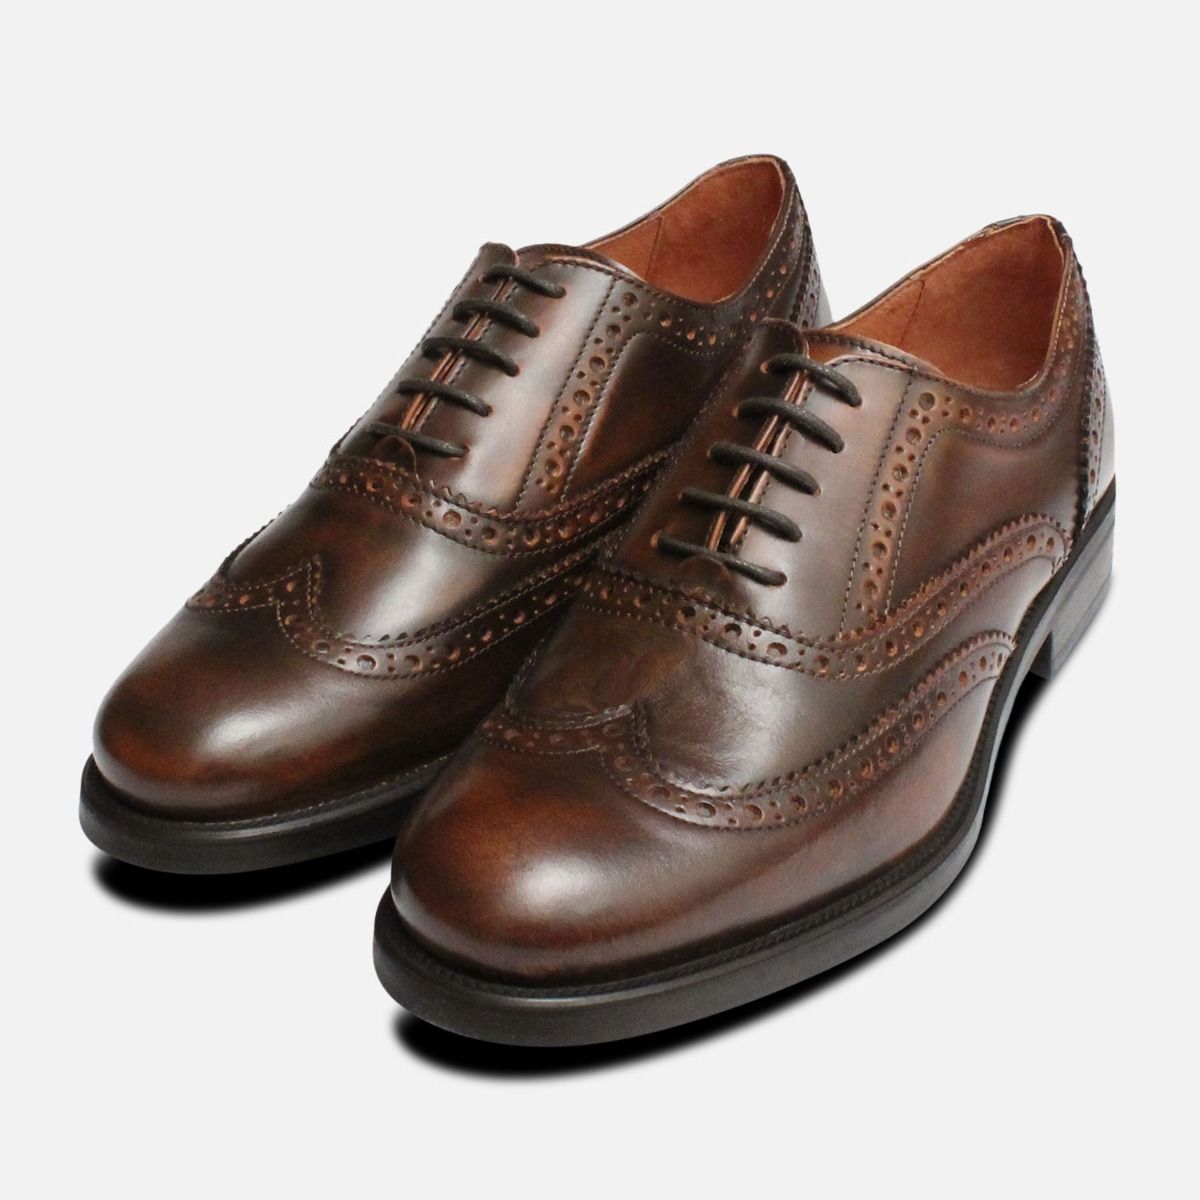 Antique Brown Oxford Brogues for Ladies